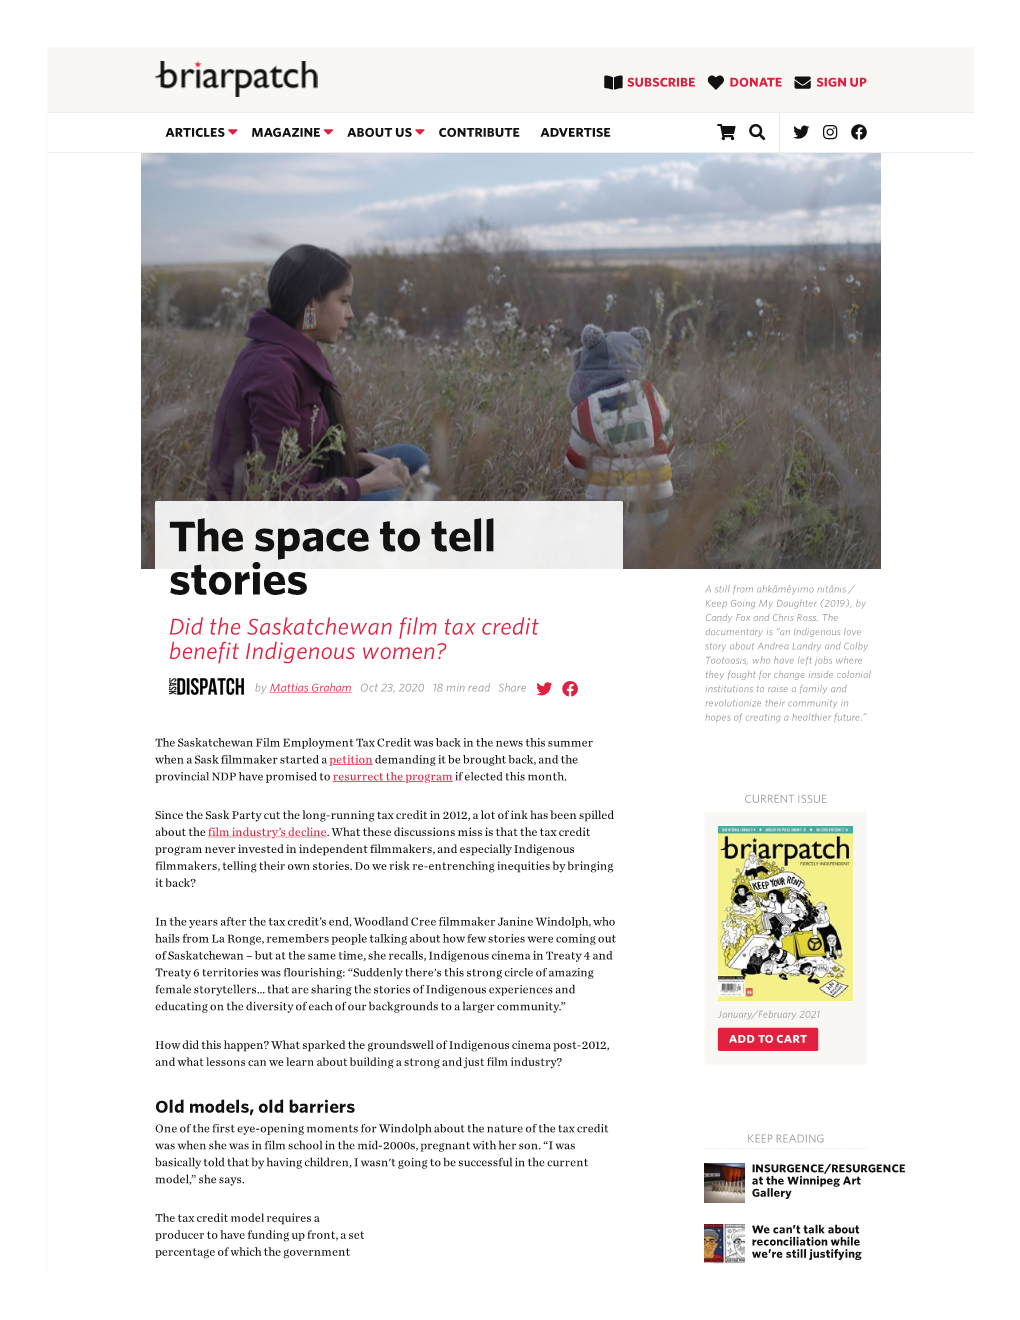 The Space to Tell Stories